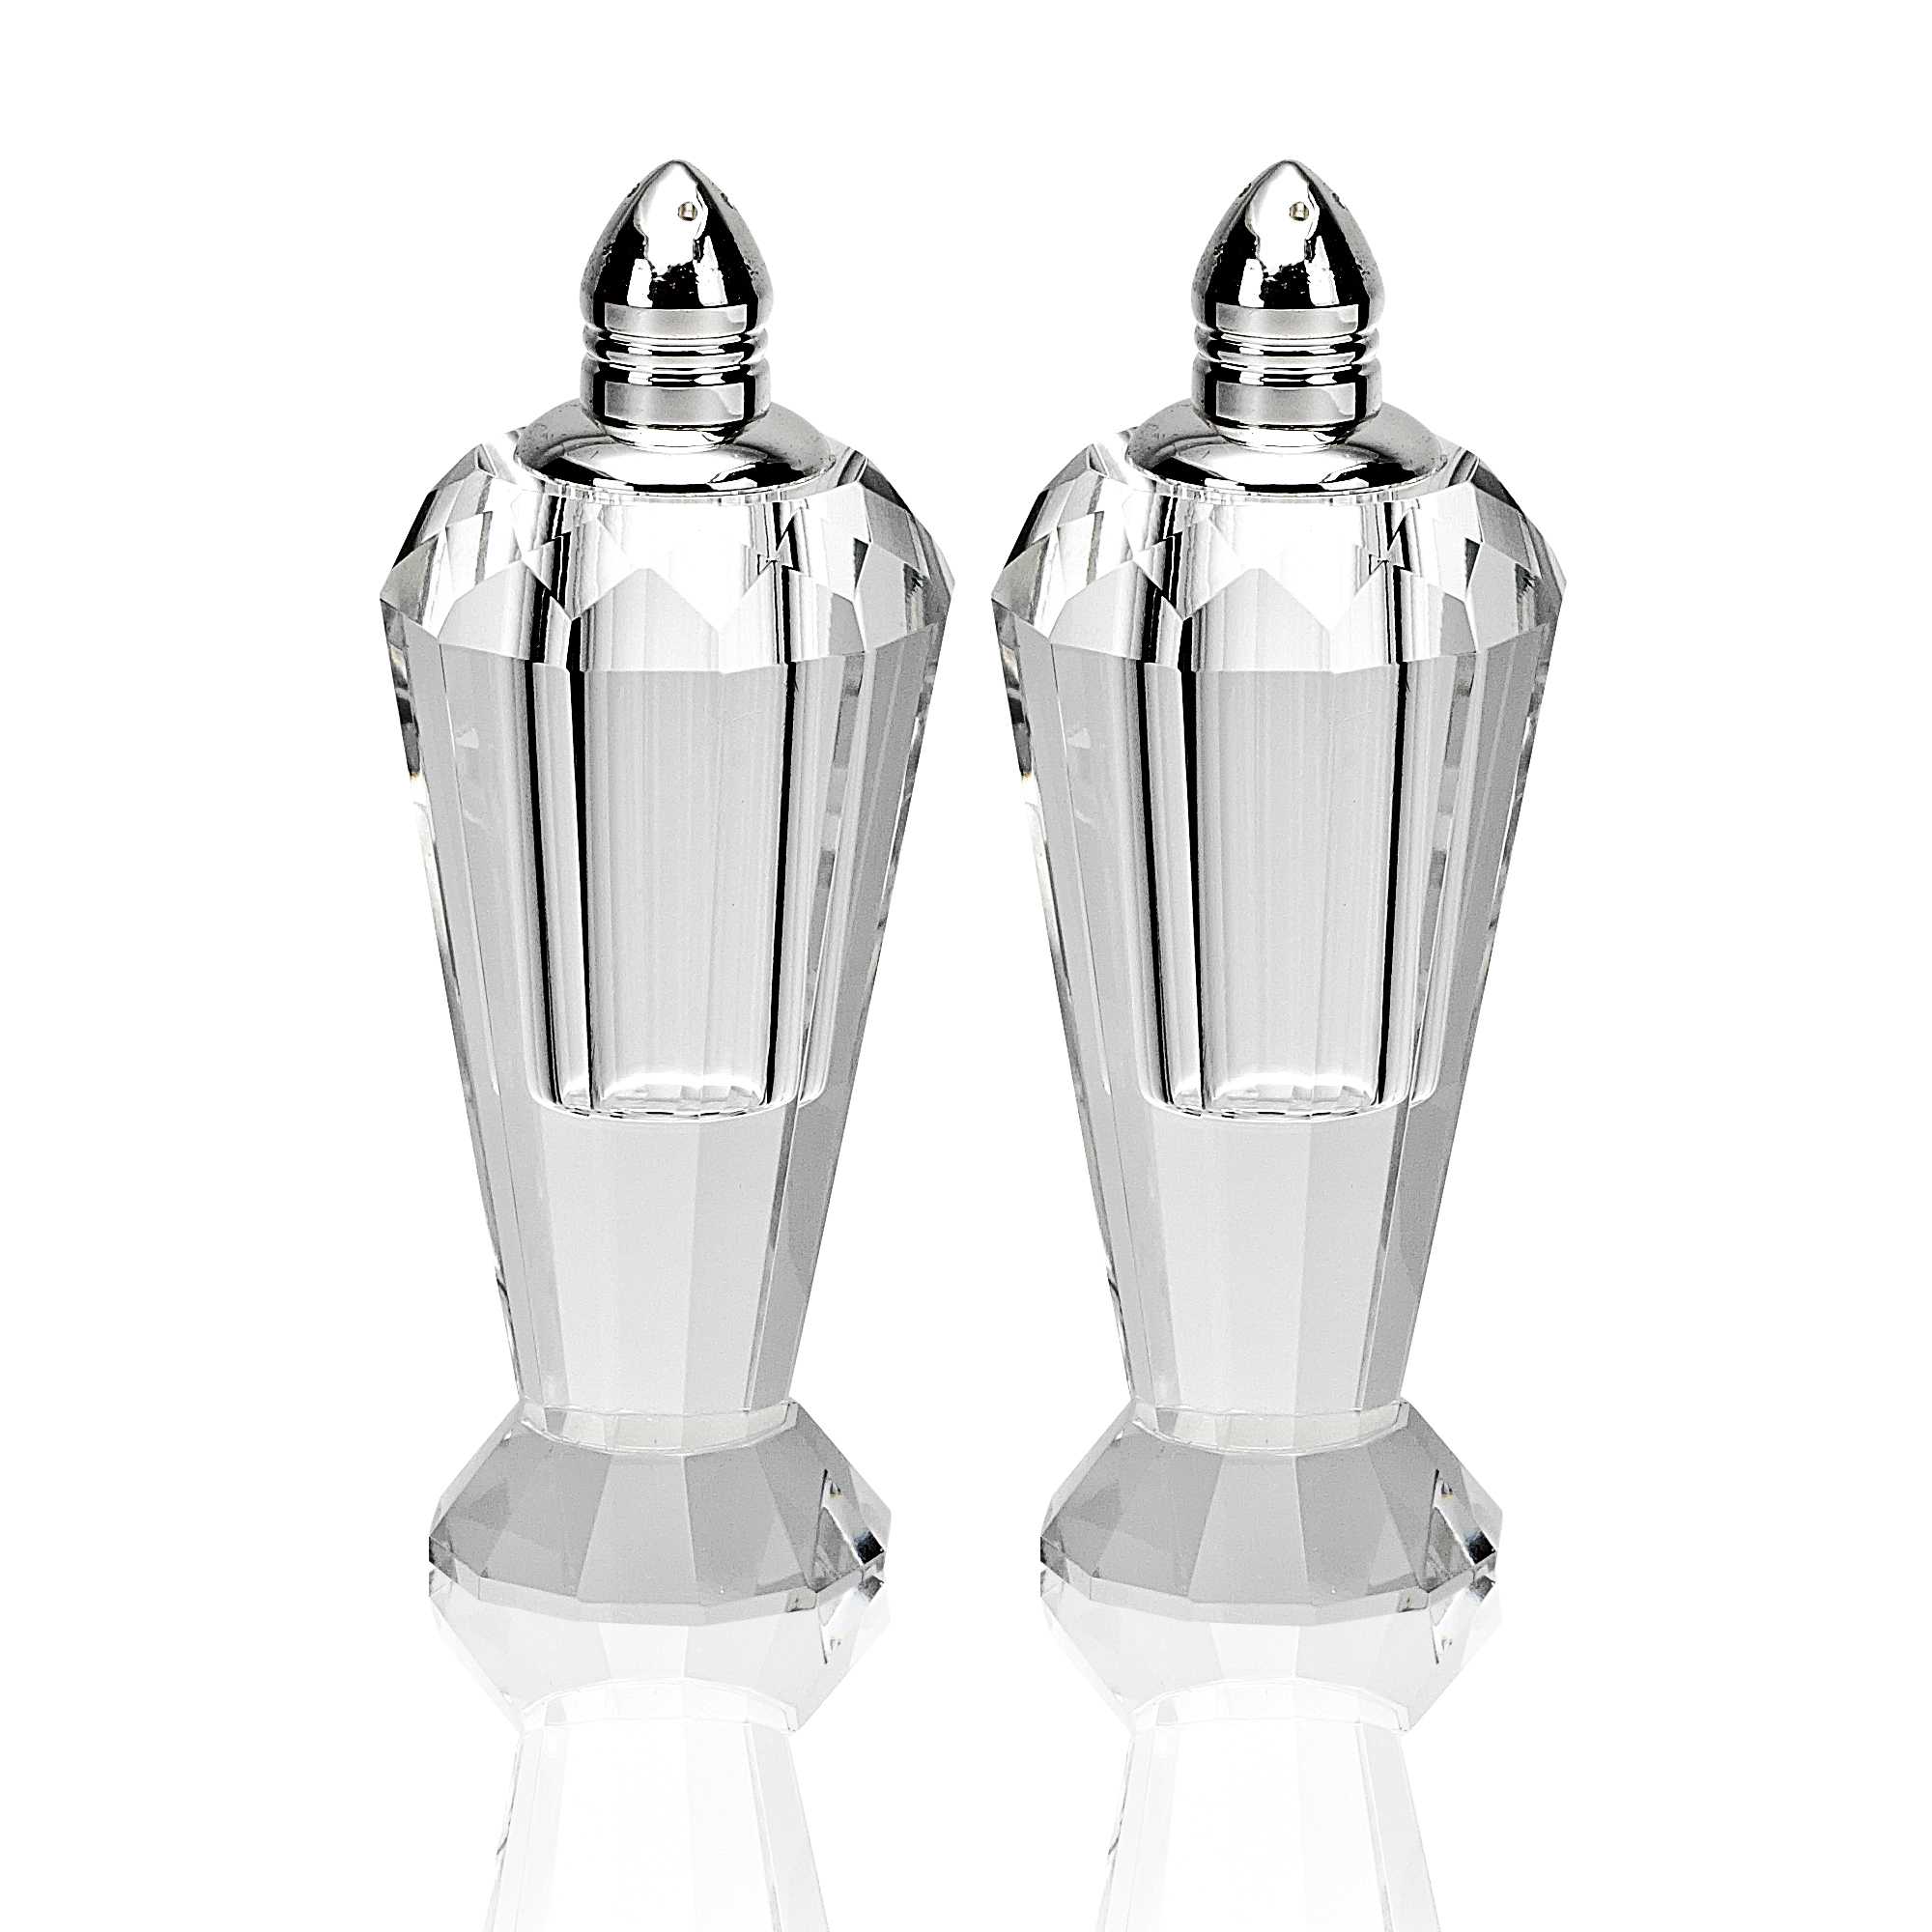 Handcrafted Optical Crystal and Silver Pair of Salt & Pepper Shakers